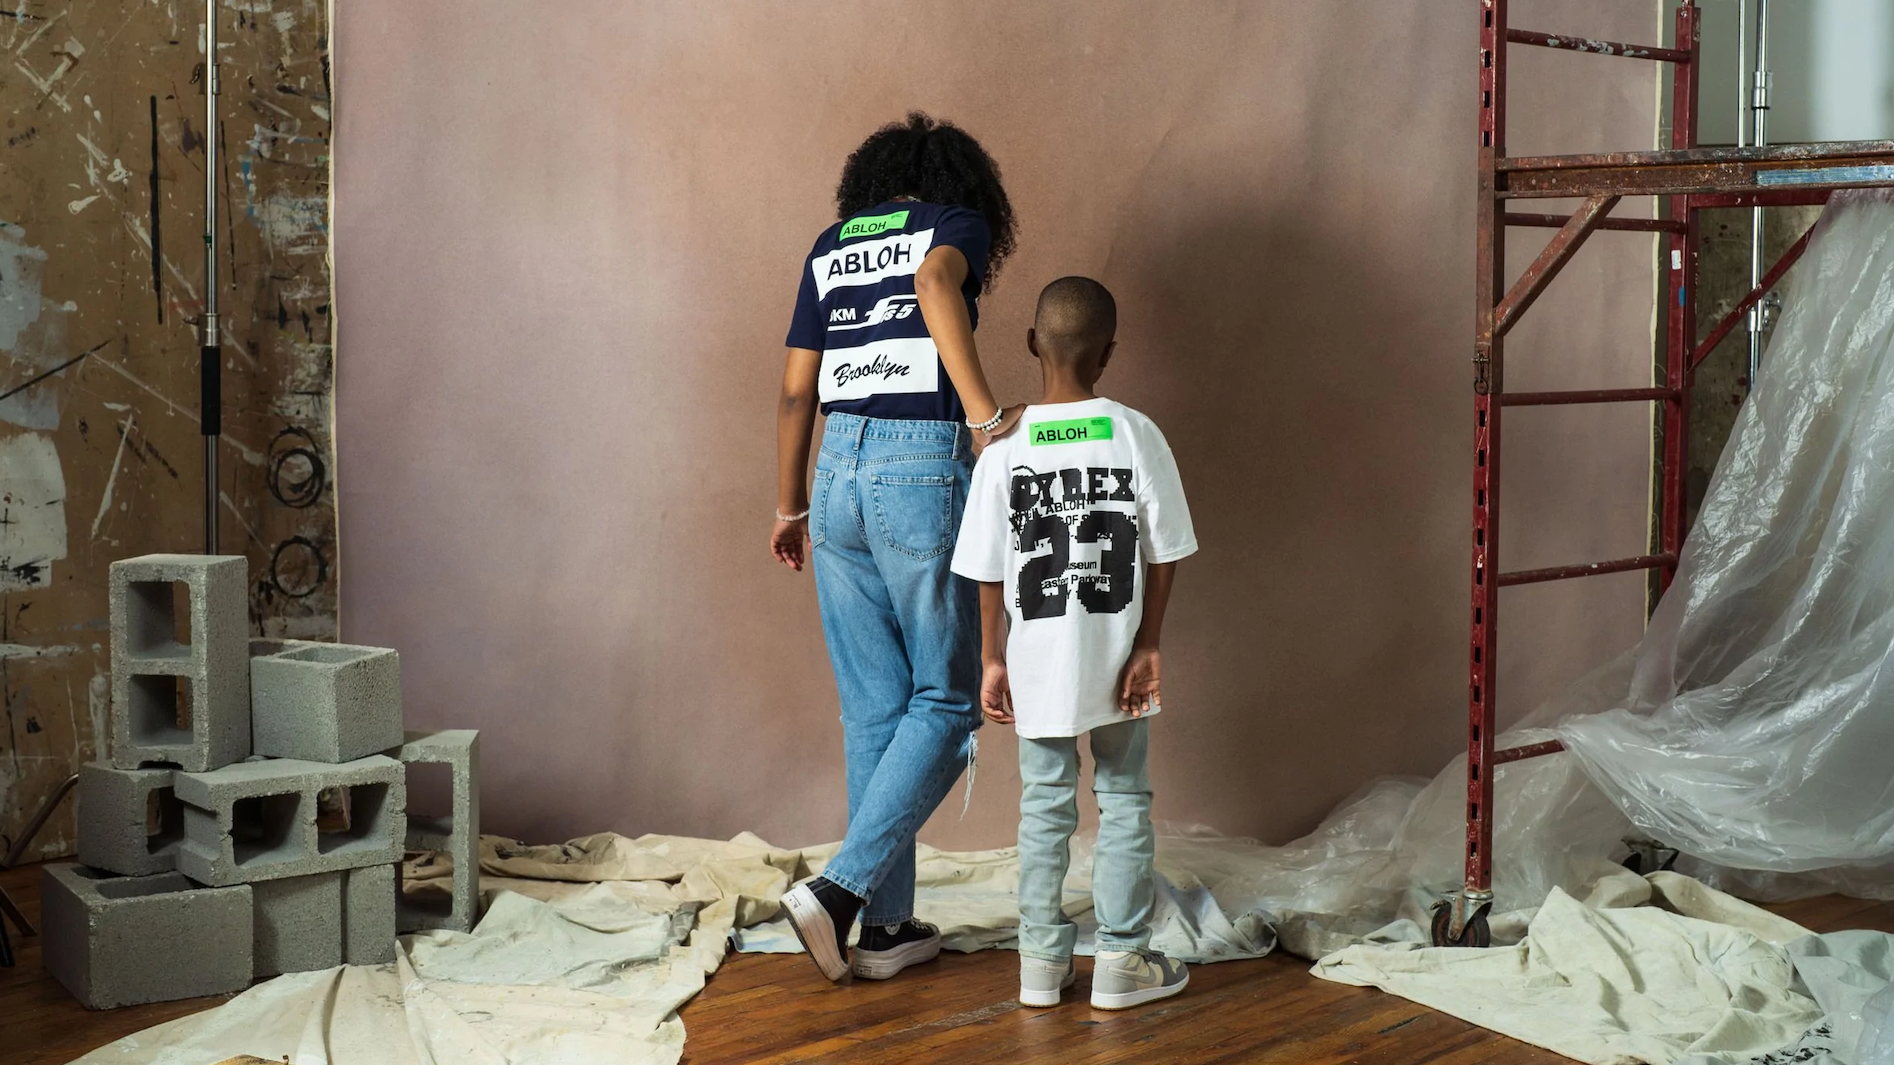 Review: Virgil Abloh: Figures of Speech — The Fashion Studies Journal